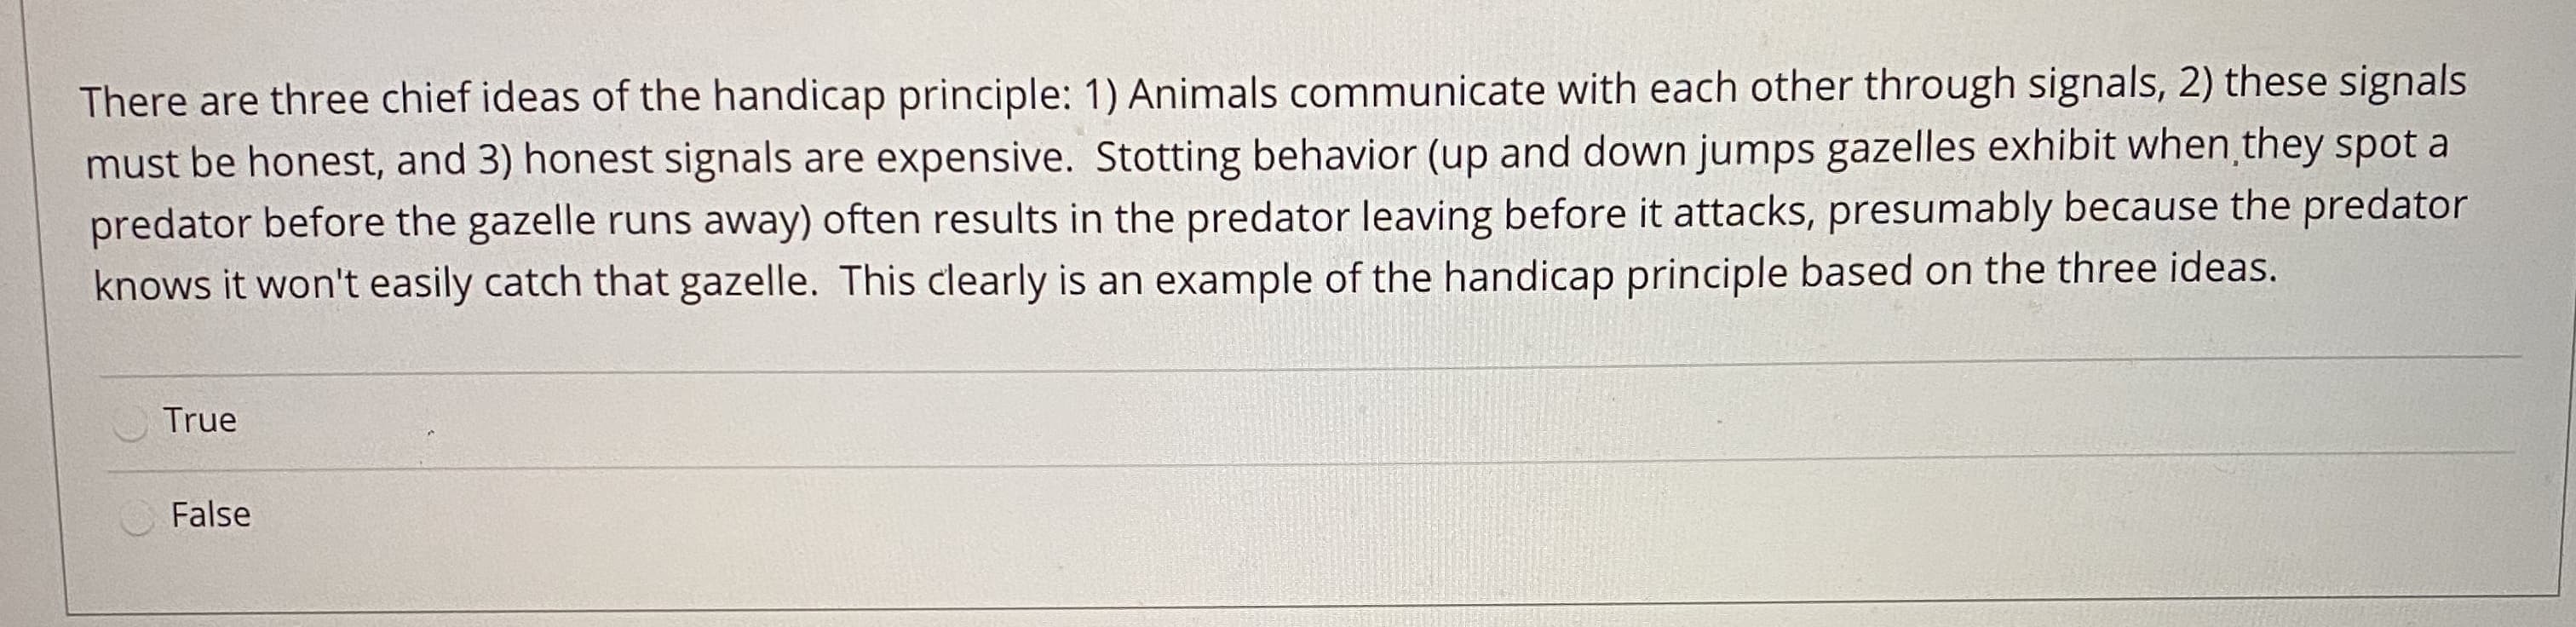 There are three chief ideas of the handicap principle: 1) Animals communicate with éach other throughn sigi
must be honest, and 3) honest signals are expensive. Stotting behavior (up and down jumps gazelles exhibit when they spot a
predator before the gazelle runs away) often results in the predator leaving before it attacks, presumably because the predator
knows it won't easily catch that gazelle. This clearly is an example of the handicap principle based on the three ideas.
True
False
